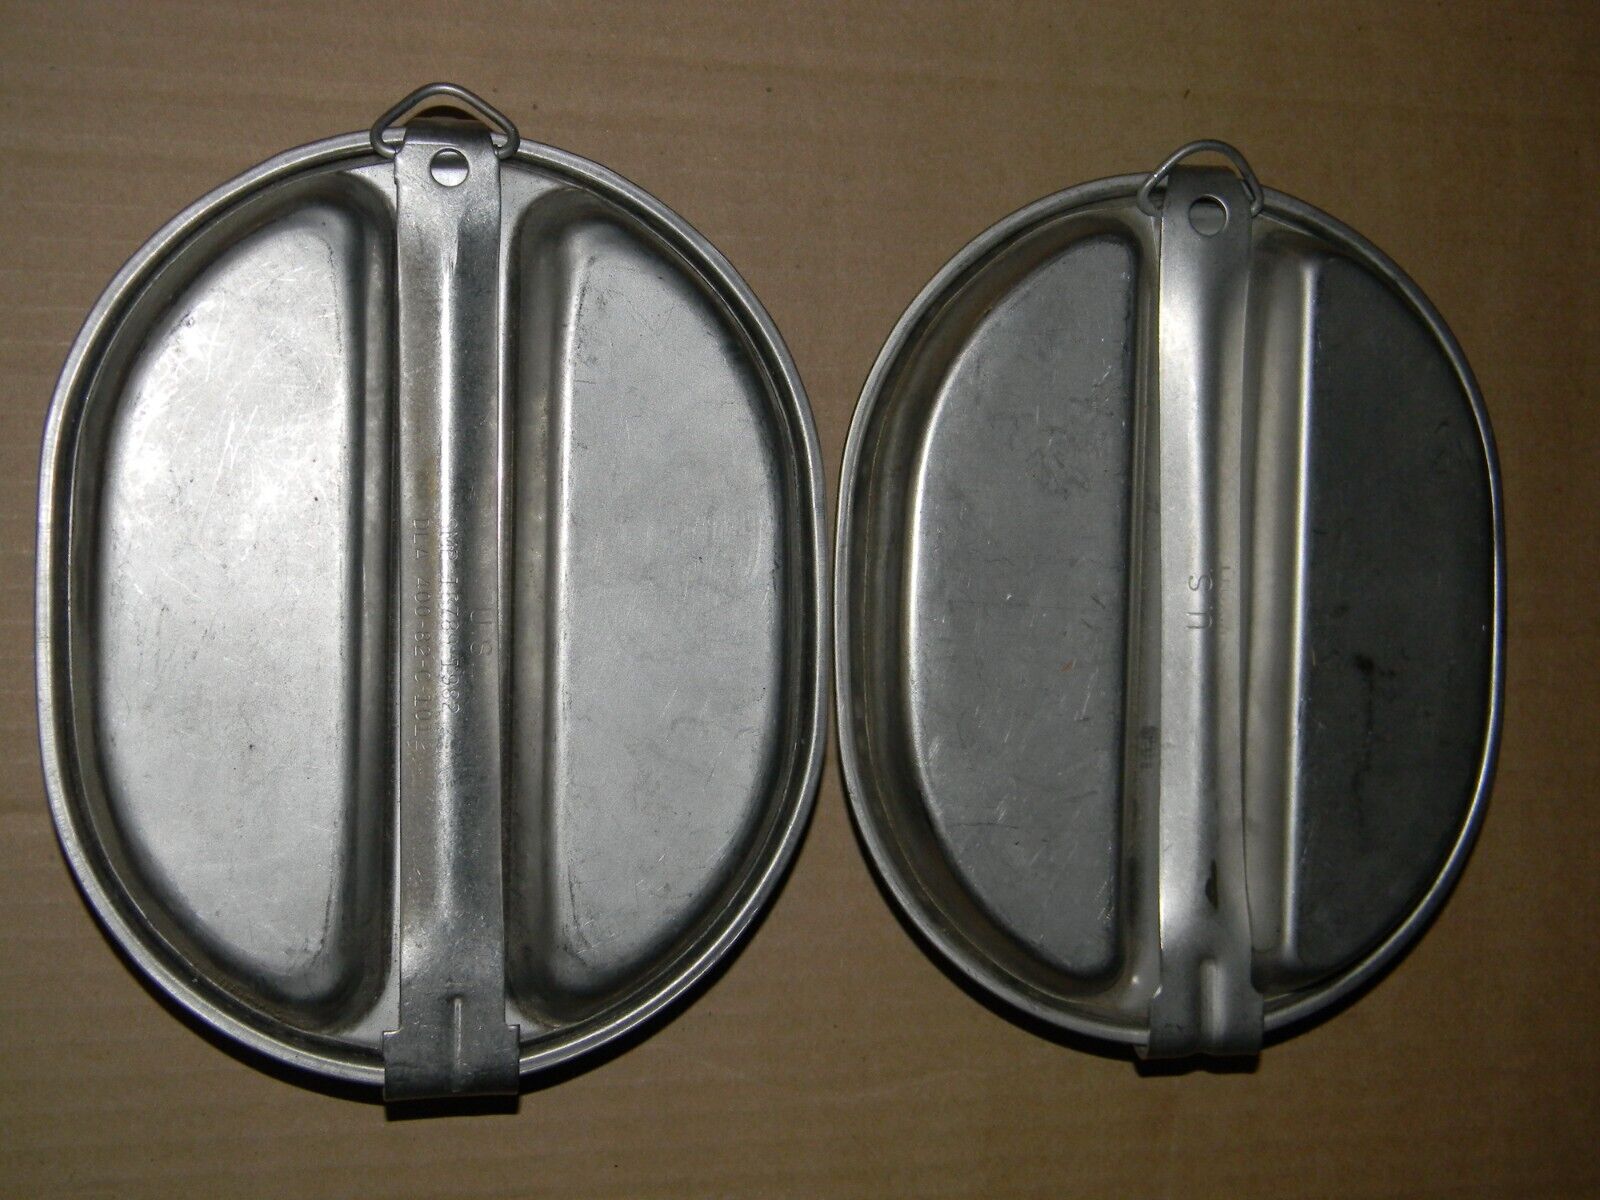 2 US Military Mess Kit 1982 SMP 18789-1982 DLA 400-82-C-1012 Camping Hiking Cook